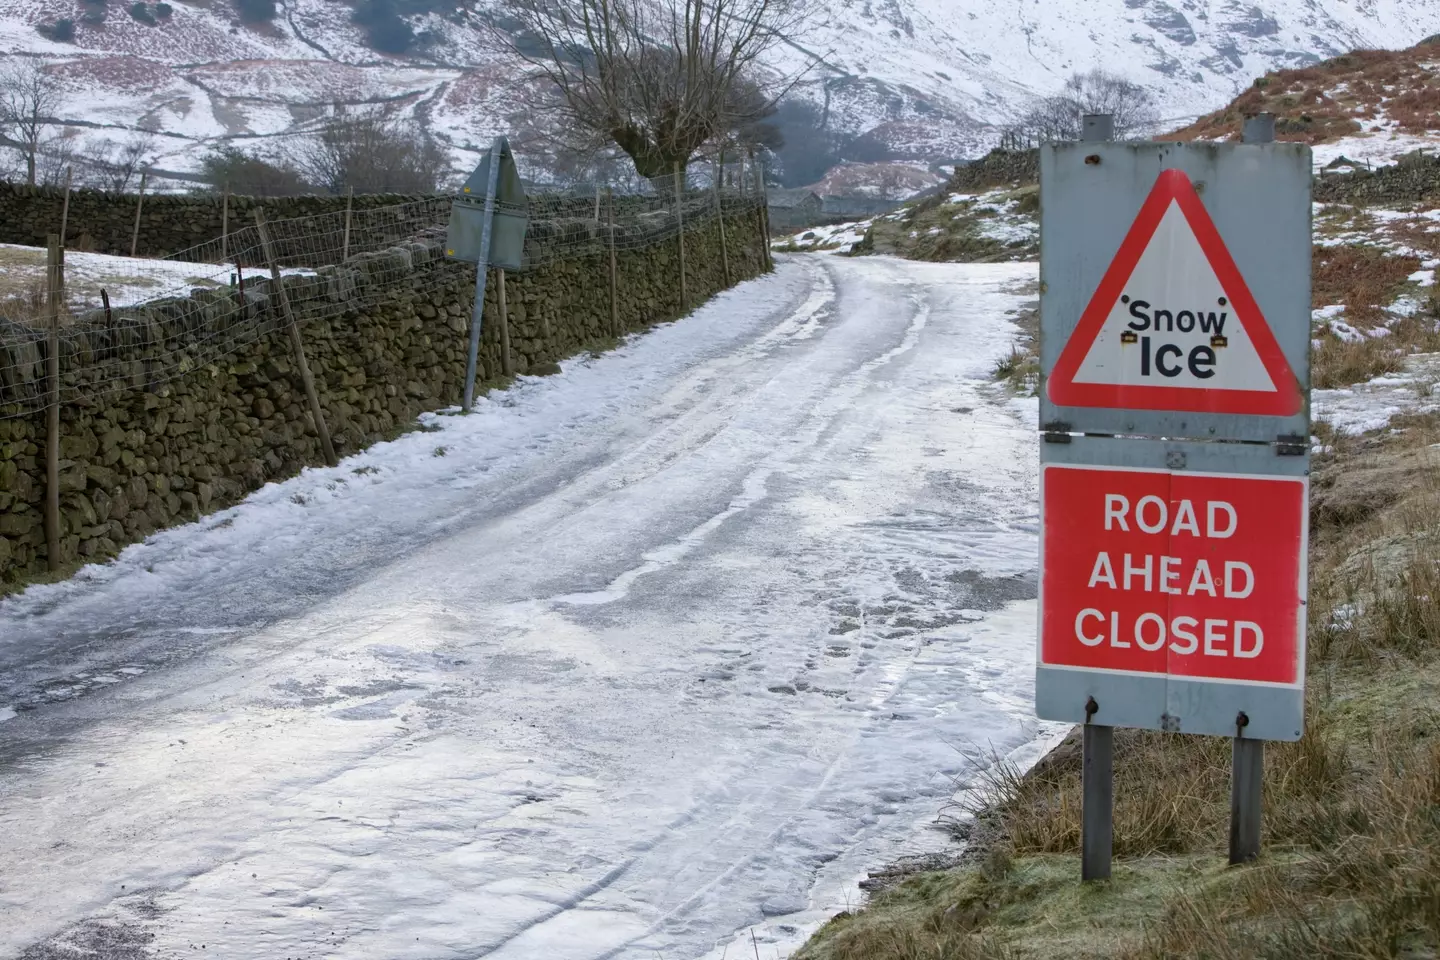 Stick to main roads that are more likely to have been gritted, and don't drive unless you have to.